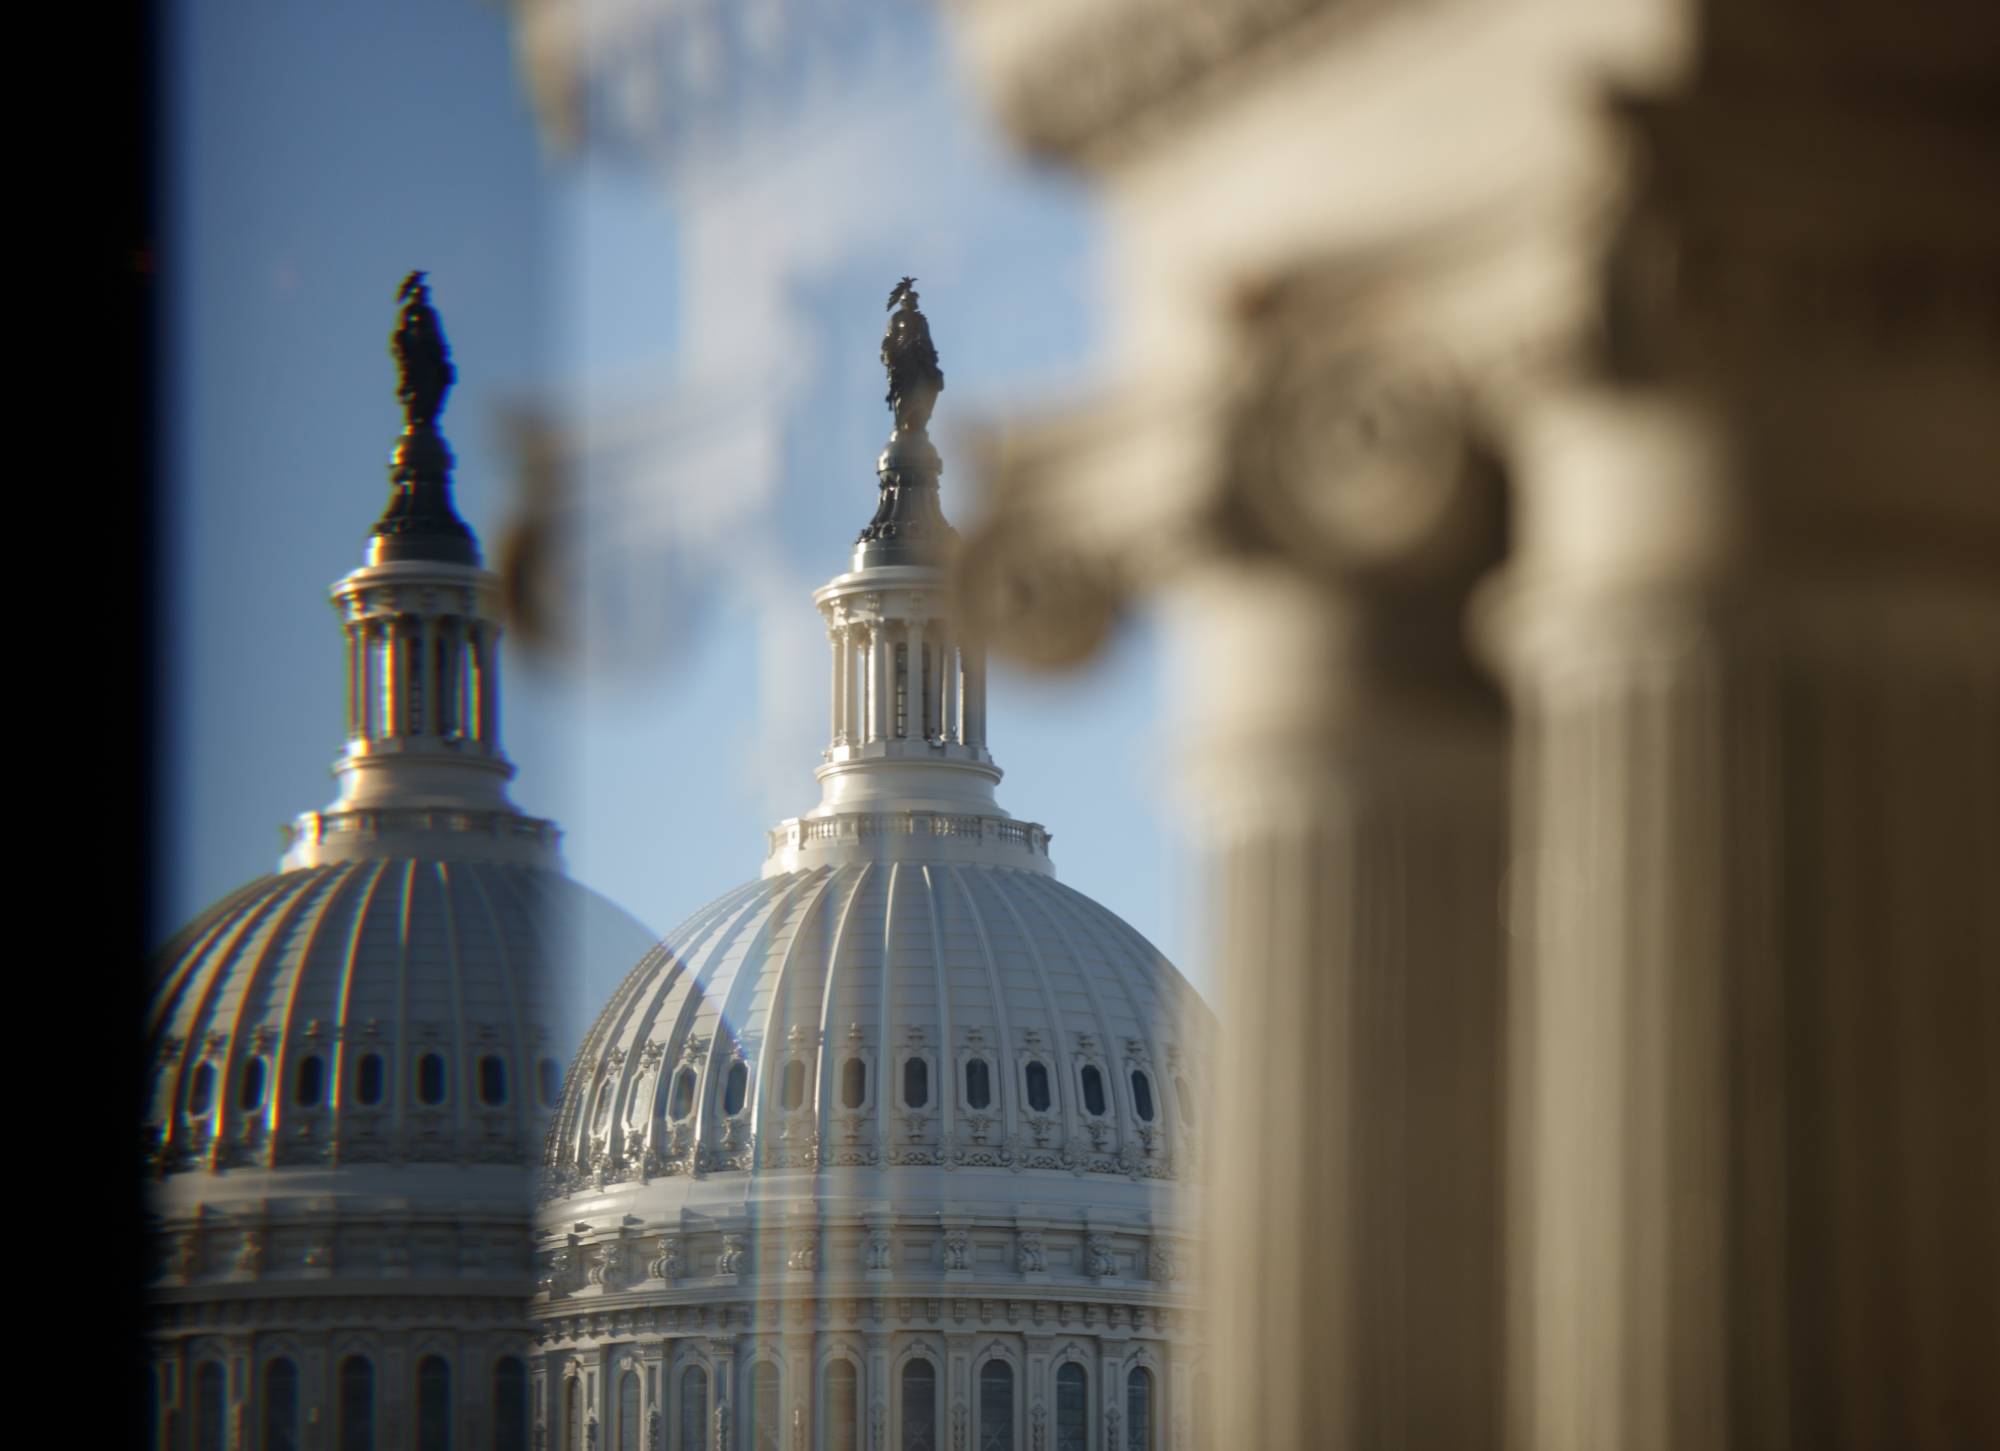 The U.S. Capitol Building Dome is seen through a beveled window at the Library of Congress in Washington, Wednesday, Dec. 19, 2018. President Donald Trump this week appears likely to pass up his last, best chance to secure funding for the “beautiful” wall he’s long promised to construct along the U.S.-Mexico border. (AP Photo/Carolyn Kaster)